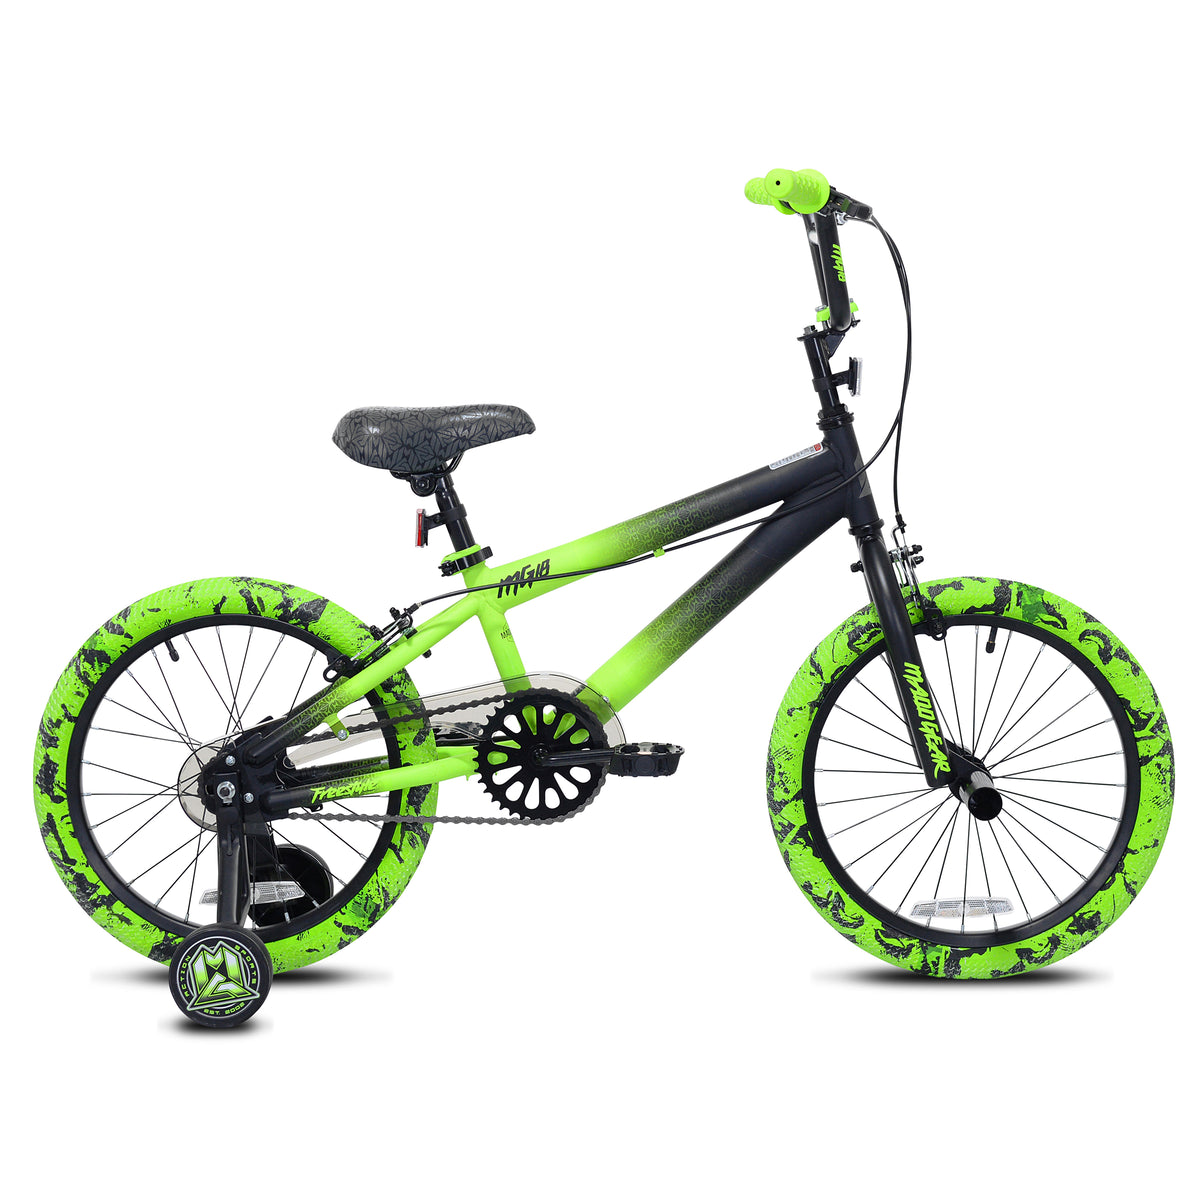 18" Madd Gear® MG18 | Bike for Kids Ages 5-8